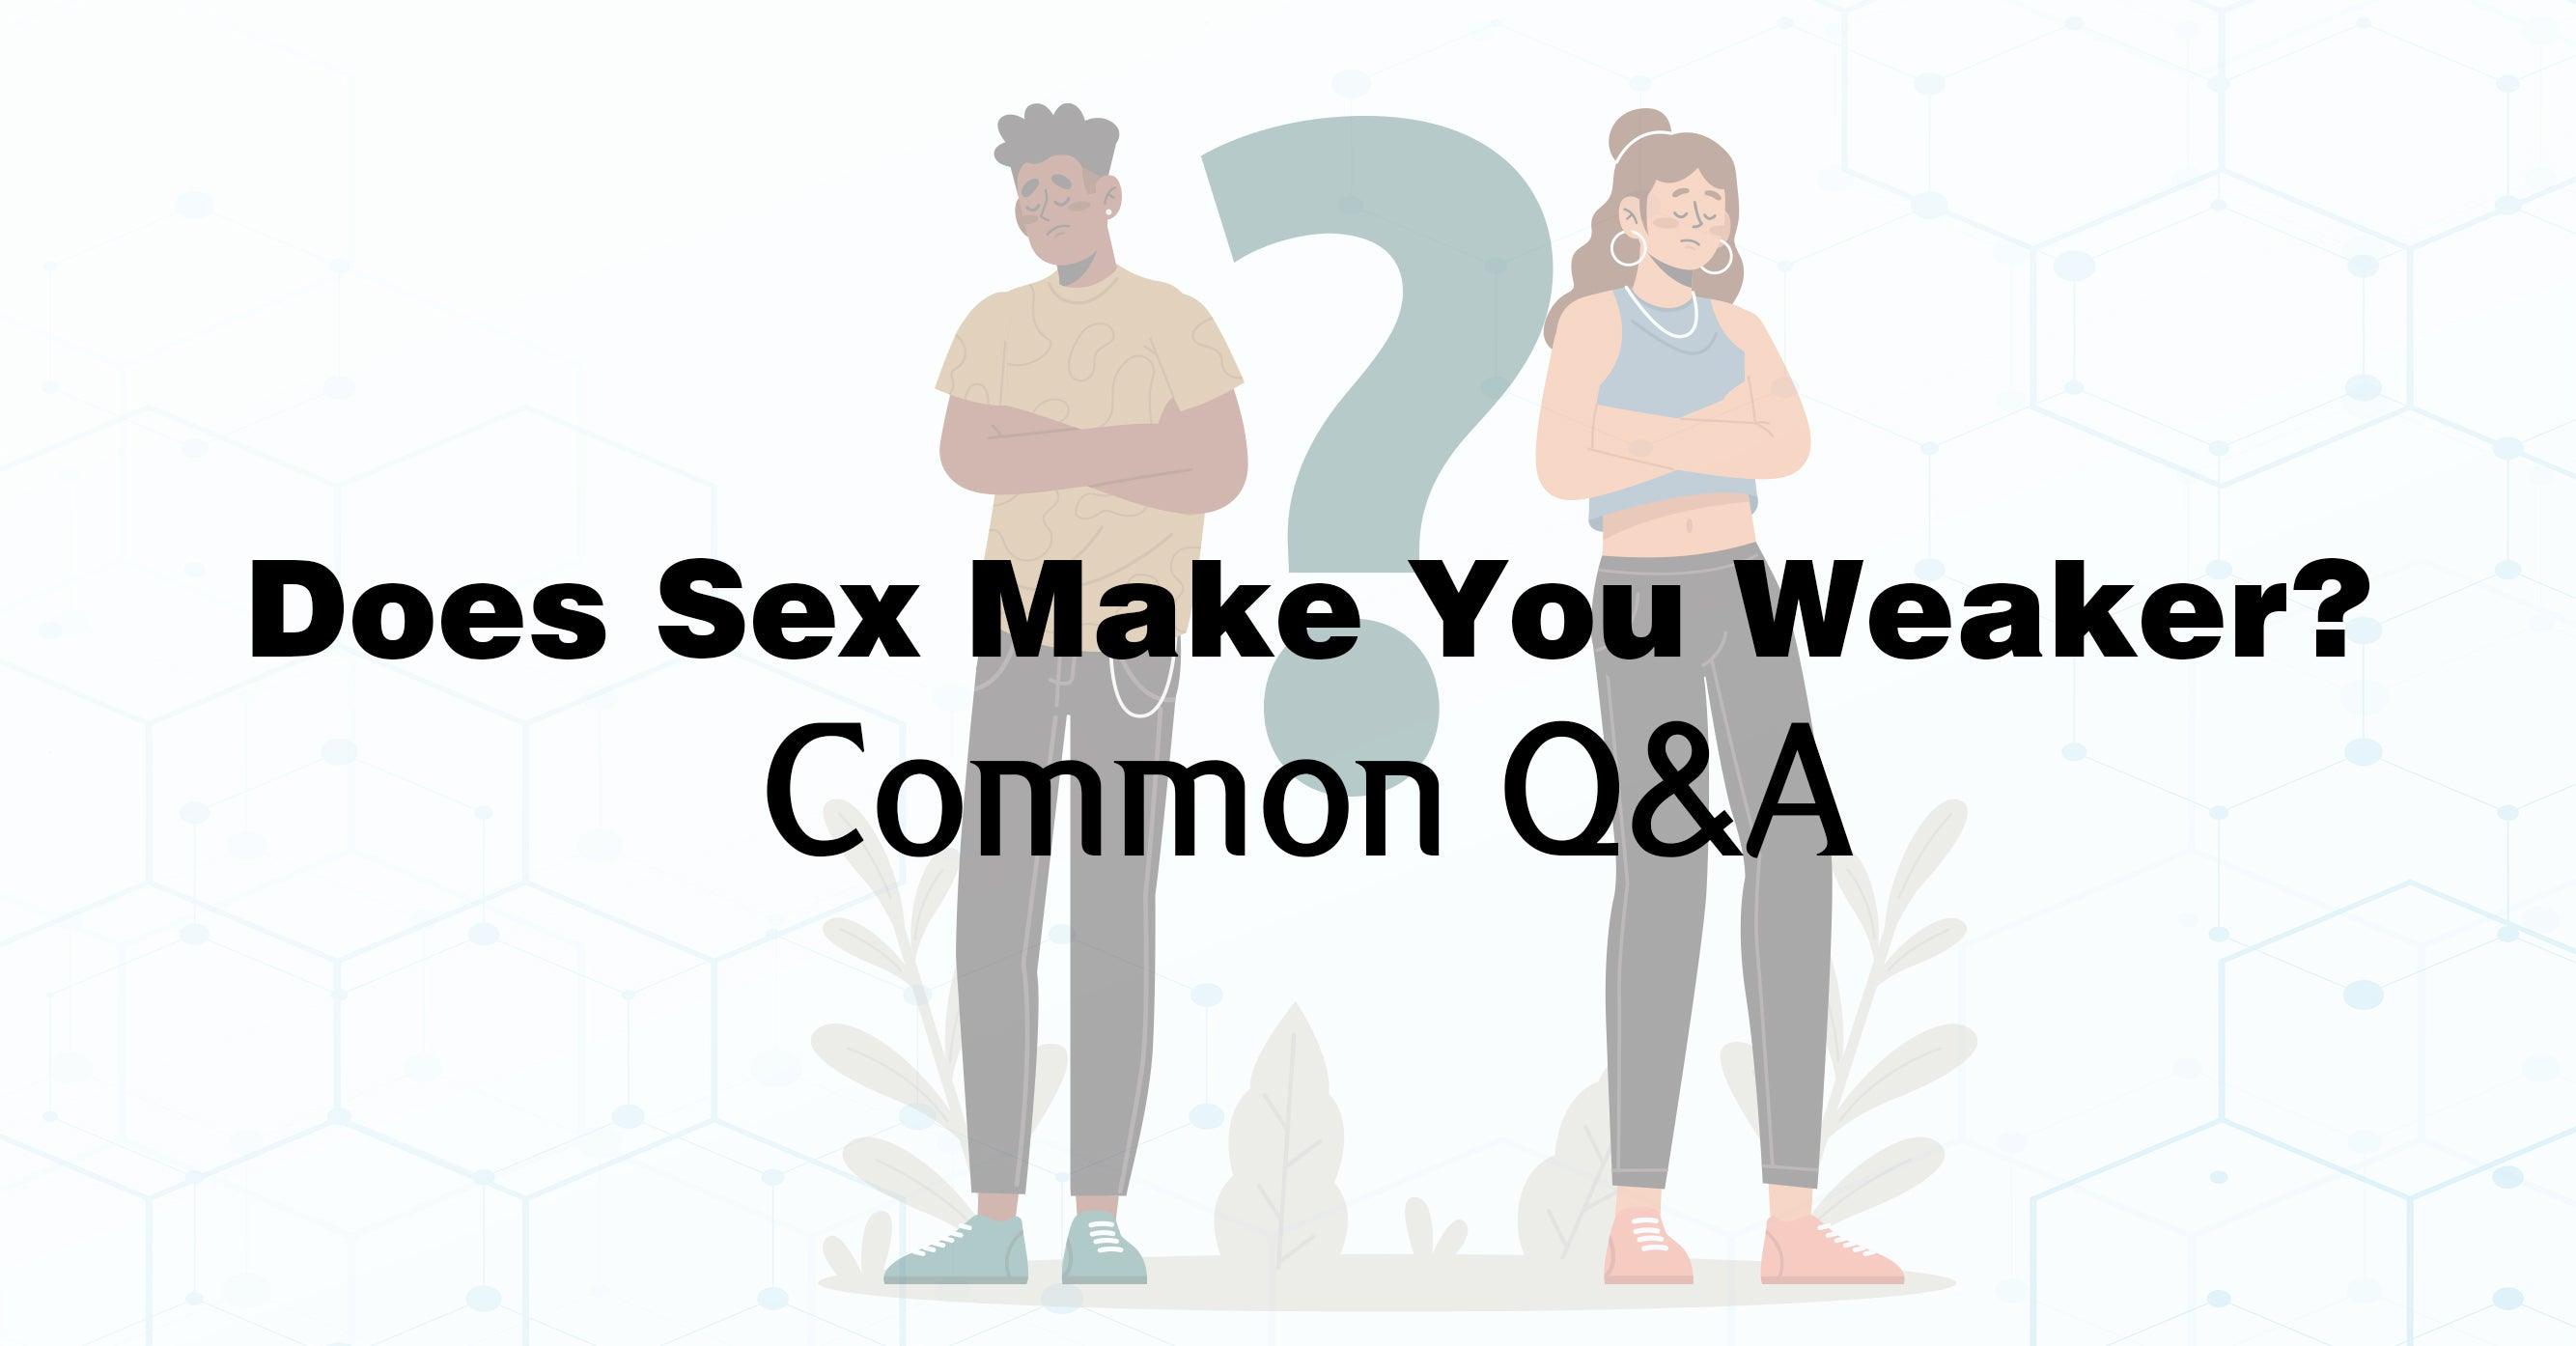 Does sex make you weaker? Common Q&A